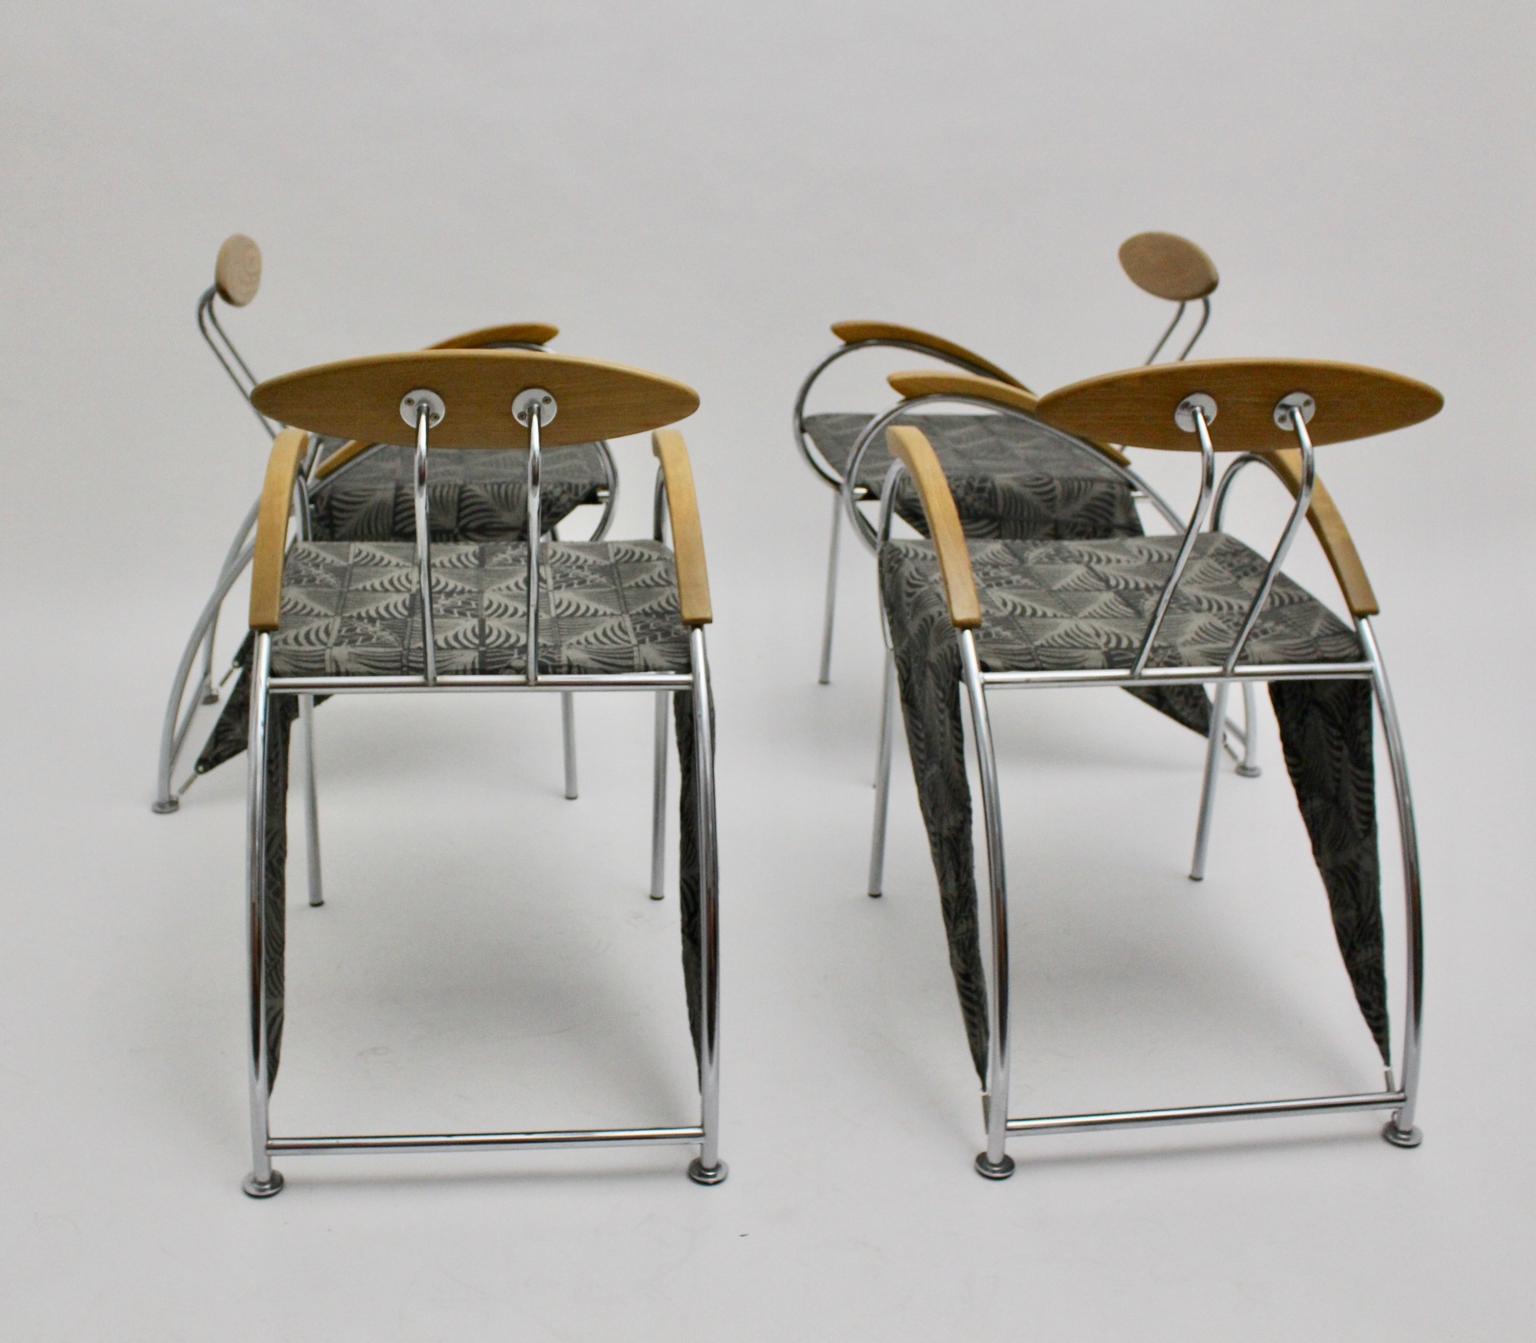 Postmodern Set of Four Vintage Dining Chair Massimo Iosa Ghini Moroso 1988 Italy For Sale 4